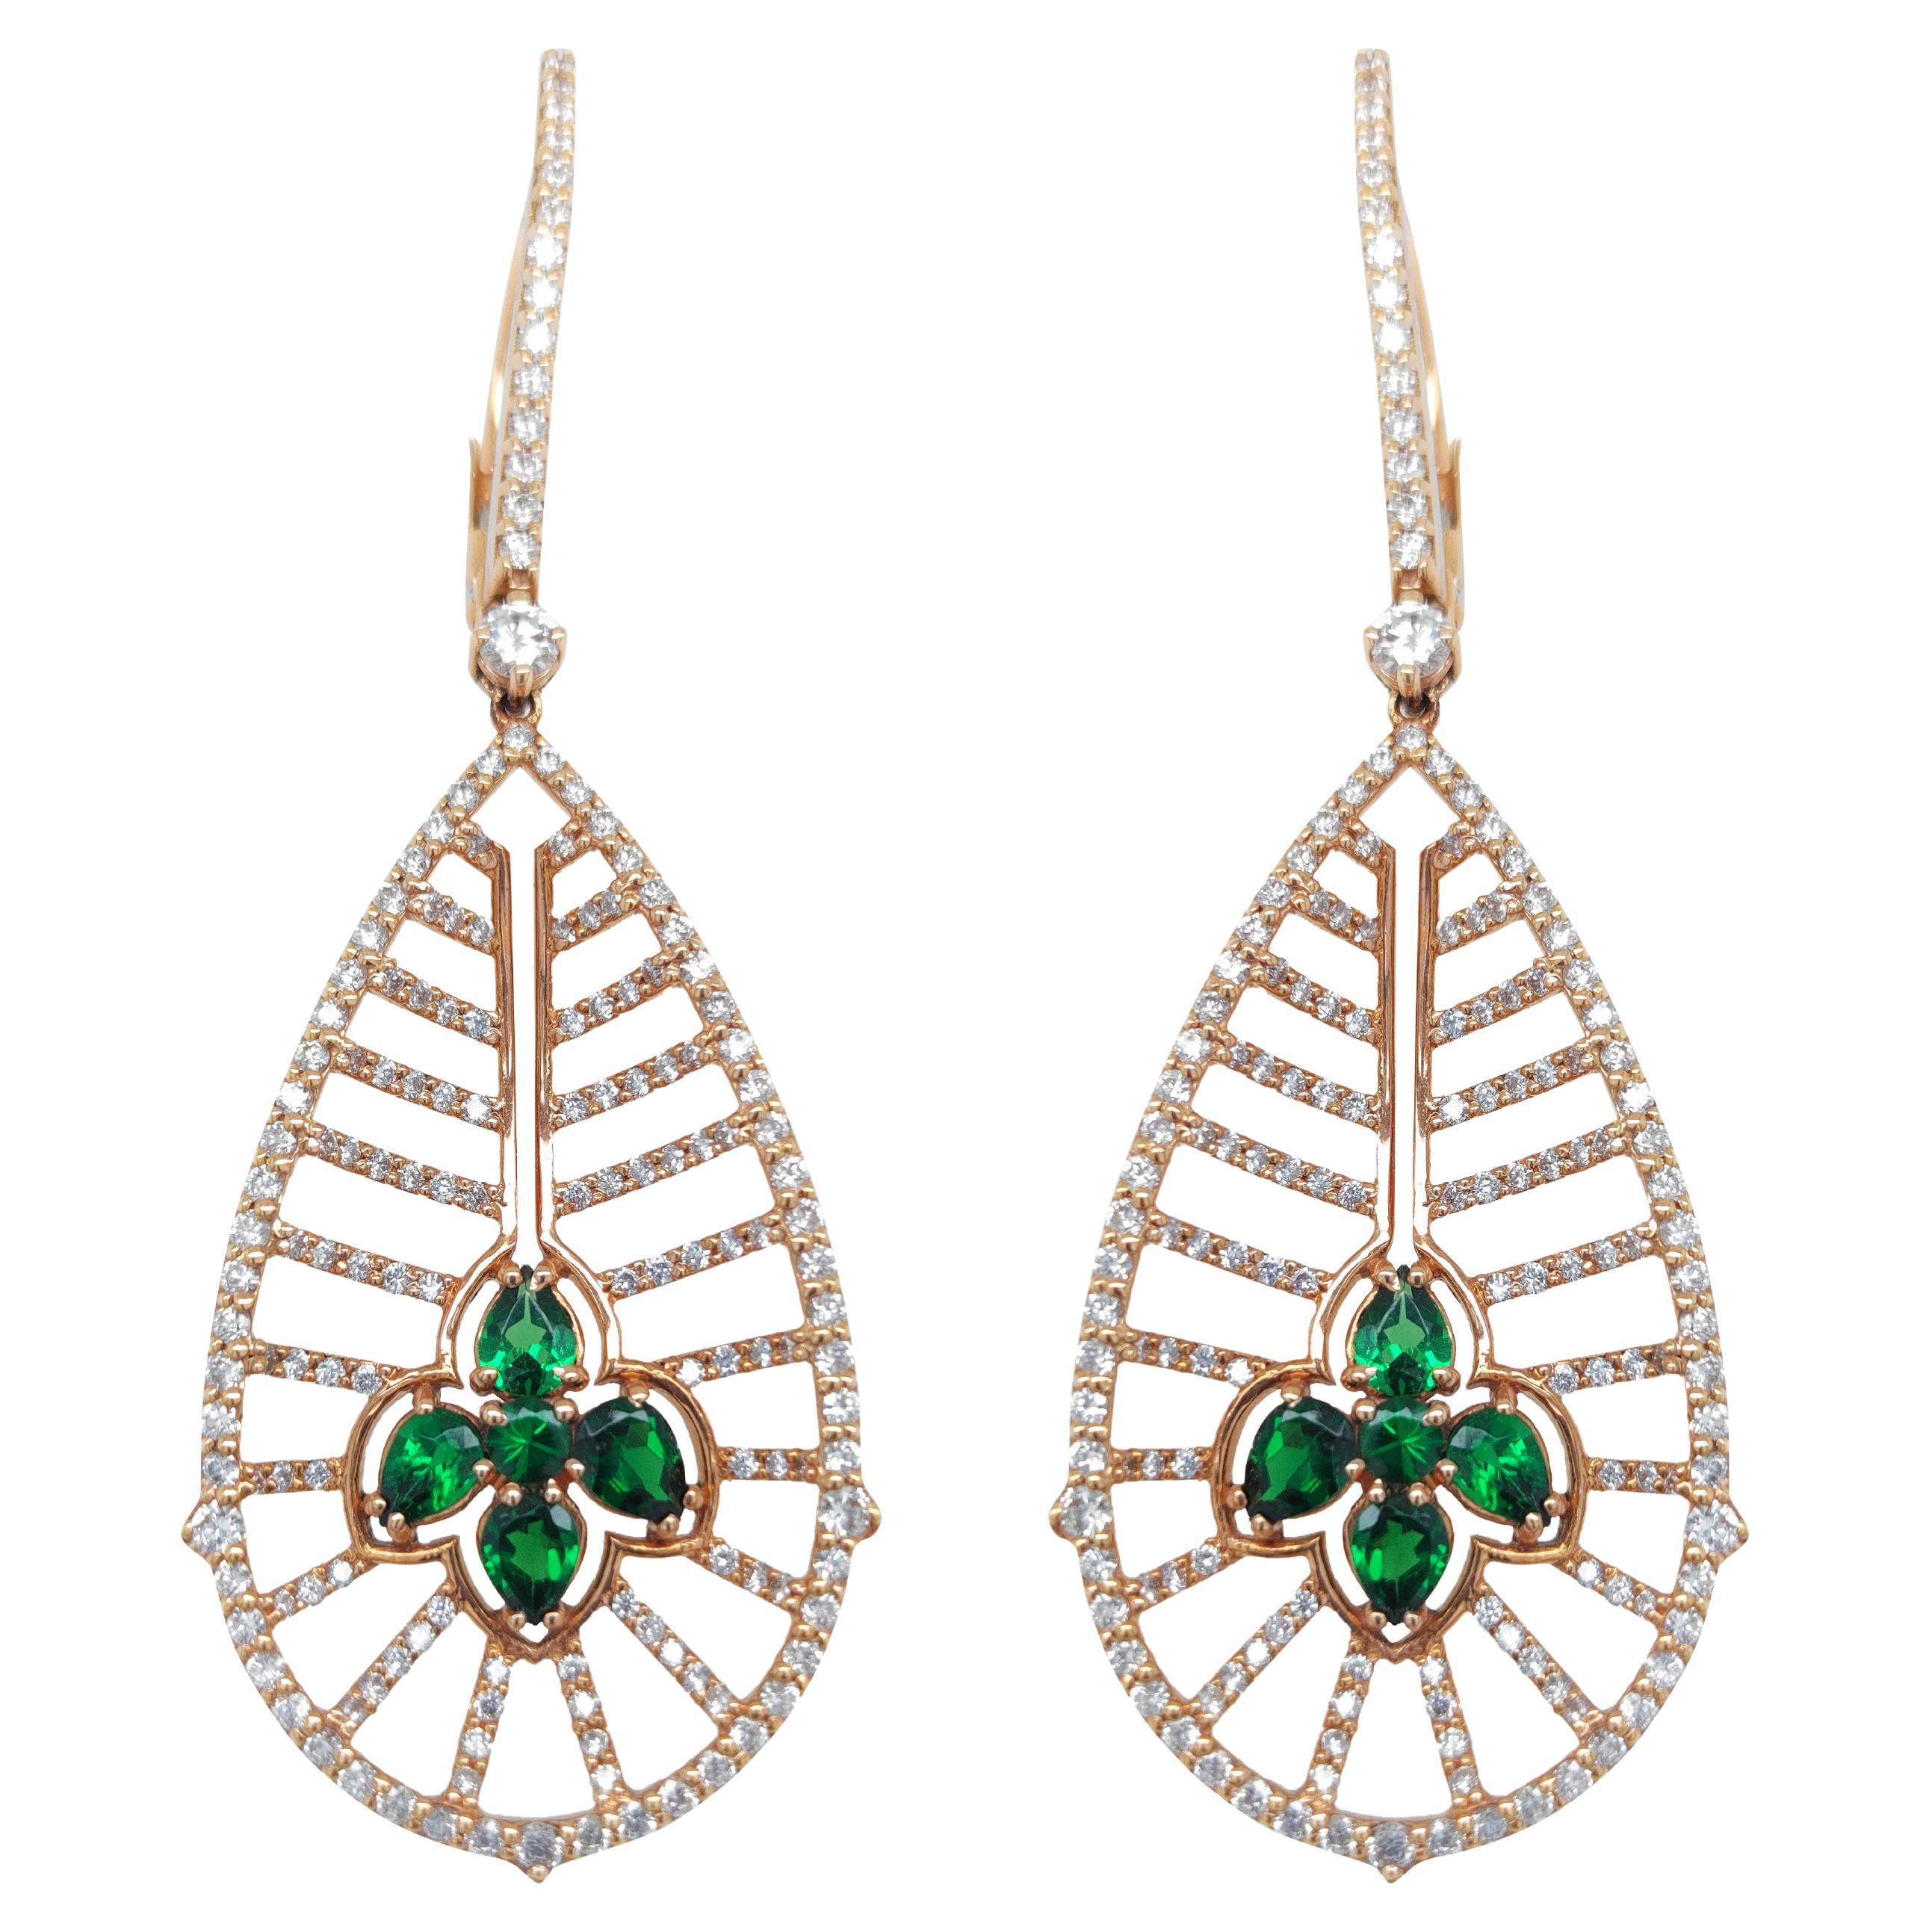 18kt Rose gold pendant earrings with 1, 80 cts tzavorite & 2 cts diamonds